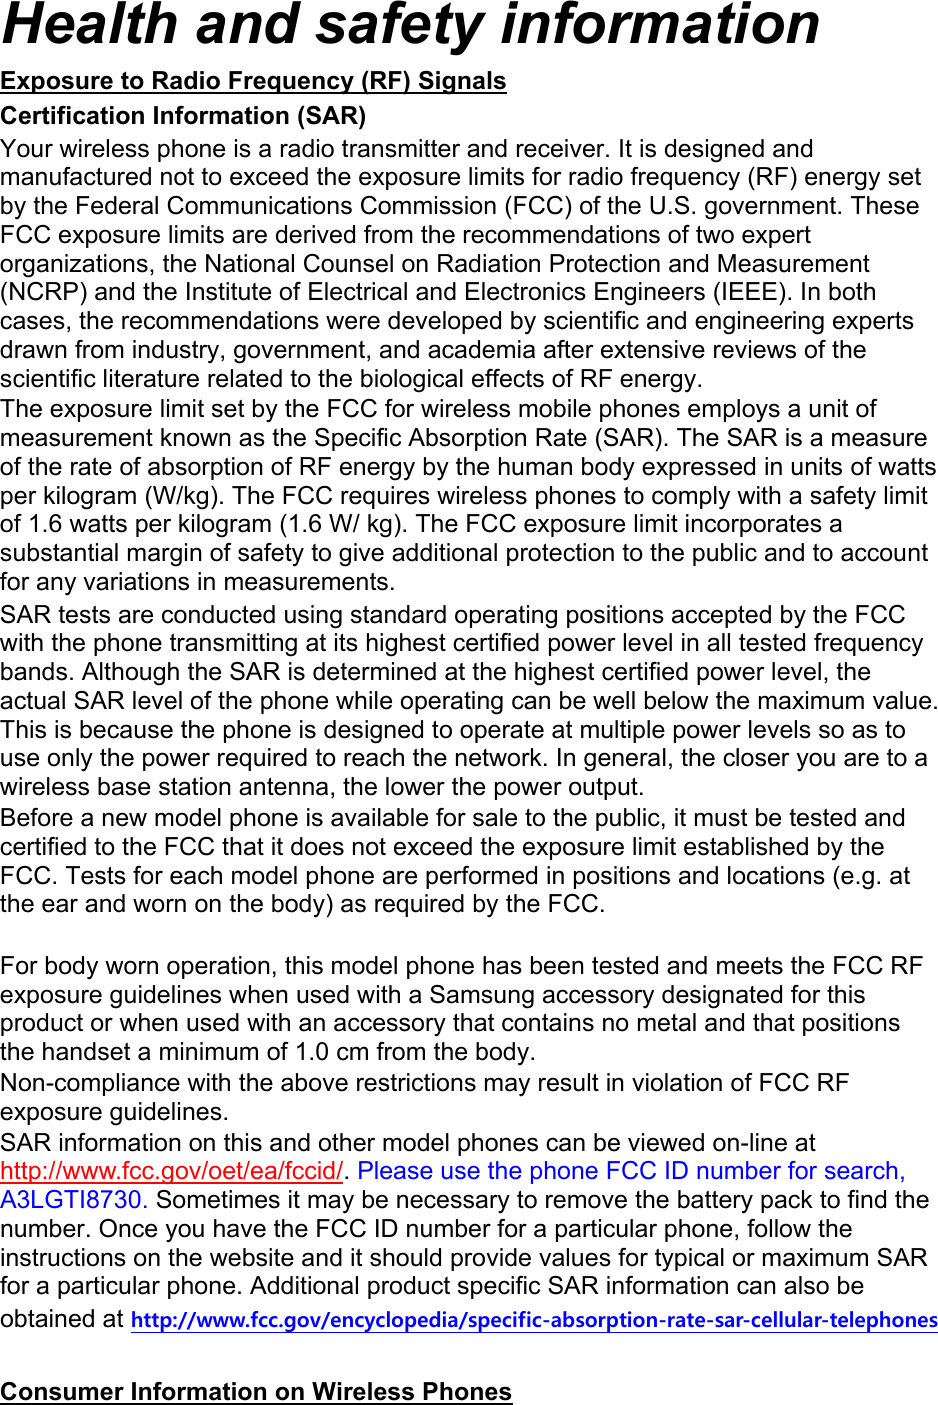 Health and safety information Exposure to Radio Frequency (RF) Signals Certification Information (SAR) Your wireless phone is a radio transmitter and receiver. It is designed and manufactured not to exceed the exposure limits for radio frequency (RF) energy set by the Federal Communications Commission (FCC) of the U.S. government. These FCC exposure limits are derived from the recommendations of two expert organizations, the National Counsel on Radiation Protection and Measurement (NCRP) and the Institute of Electrical and Electronics Engineers (IEEE). In both cases, the recommendations were developed by scientific and engineering experts drawn from industry, government, and academia after extensive reviews of the scientific literature related to the biological effects of RF energy. The exposure limit set by the FCC for wireless mobile phones employs a unit of measurement known as the Specific Absorption Rate (SAR). The SAR is a measure of the rate of absorption of RF energy by the human body expressed in units of watts per kilogram (W/kg). The FCC requires wireless phones to comply with a safety limit of 1.6 watts per kilogram (1.6 W/ kg). The FCC exposure limit incorporates a substantial margin of safety to give additional protection to the public and to account for any variations in measurements. SAR tests are conducted using standard operating positions accepted by the FCC with the phone transmitting at its highest certified power level in all tested frequency bands. Although the SAR is determined at the highest certified power level, the actual SAR level of the phone while operating can be well below the maximum value. This is because the phone is designed to operate at multiple power levels so as to use only the power required to reach the network. In general, the closer you are to a wireless base station antenna, the lower the power output. Before a new model phone is available for sale to the public, it must be tested and certified to the FCC that it does not exceed the exposure limit established by the FCC. Tests for each model phone are performed in positions and locations (e.g. at the ear and worn on the body) as required by the FCC.      For body worn operation, this model phone has been tested and meets the FCC RF exposure guidelines when used with a Samsung accessory designated for this product or when used with an accessory that contains no metal and that positions the handset a minimum of 1.0 cm from the body.   Non-compliance with the above restrictions may result in violation of FCC RF exposure guidelines. SAR information on this and other model phones can be viewed on-line at http://www.fcc.gov/oet/ea/fccid/. Please use the phone FCC ID number for search, A3LGTI8730. Sometimes it may be necessary to remove the battery pack to find the number. Once you have the FCC ID number for a particular phone, follow the instructions on the website and it should provide values for typical or maximum SAR for a particular phone. Additional product specific SAR information can also be obtained at http://www.fcc.gov/encyclopedia/specific-absorption-rate-sar-cellular-telephones  Consumer Information on Wireless Phones 